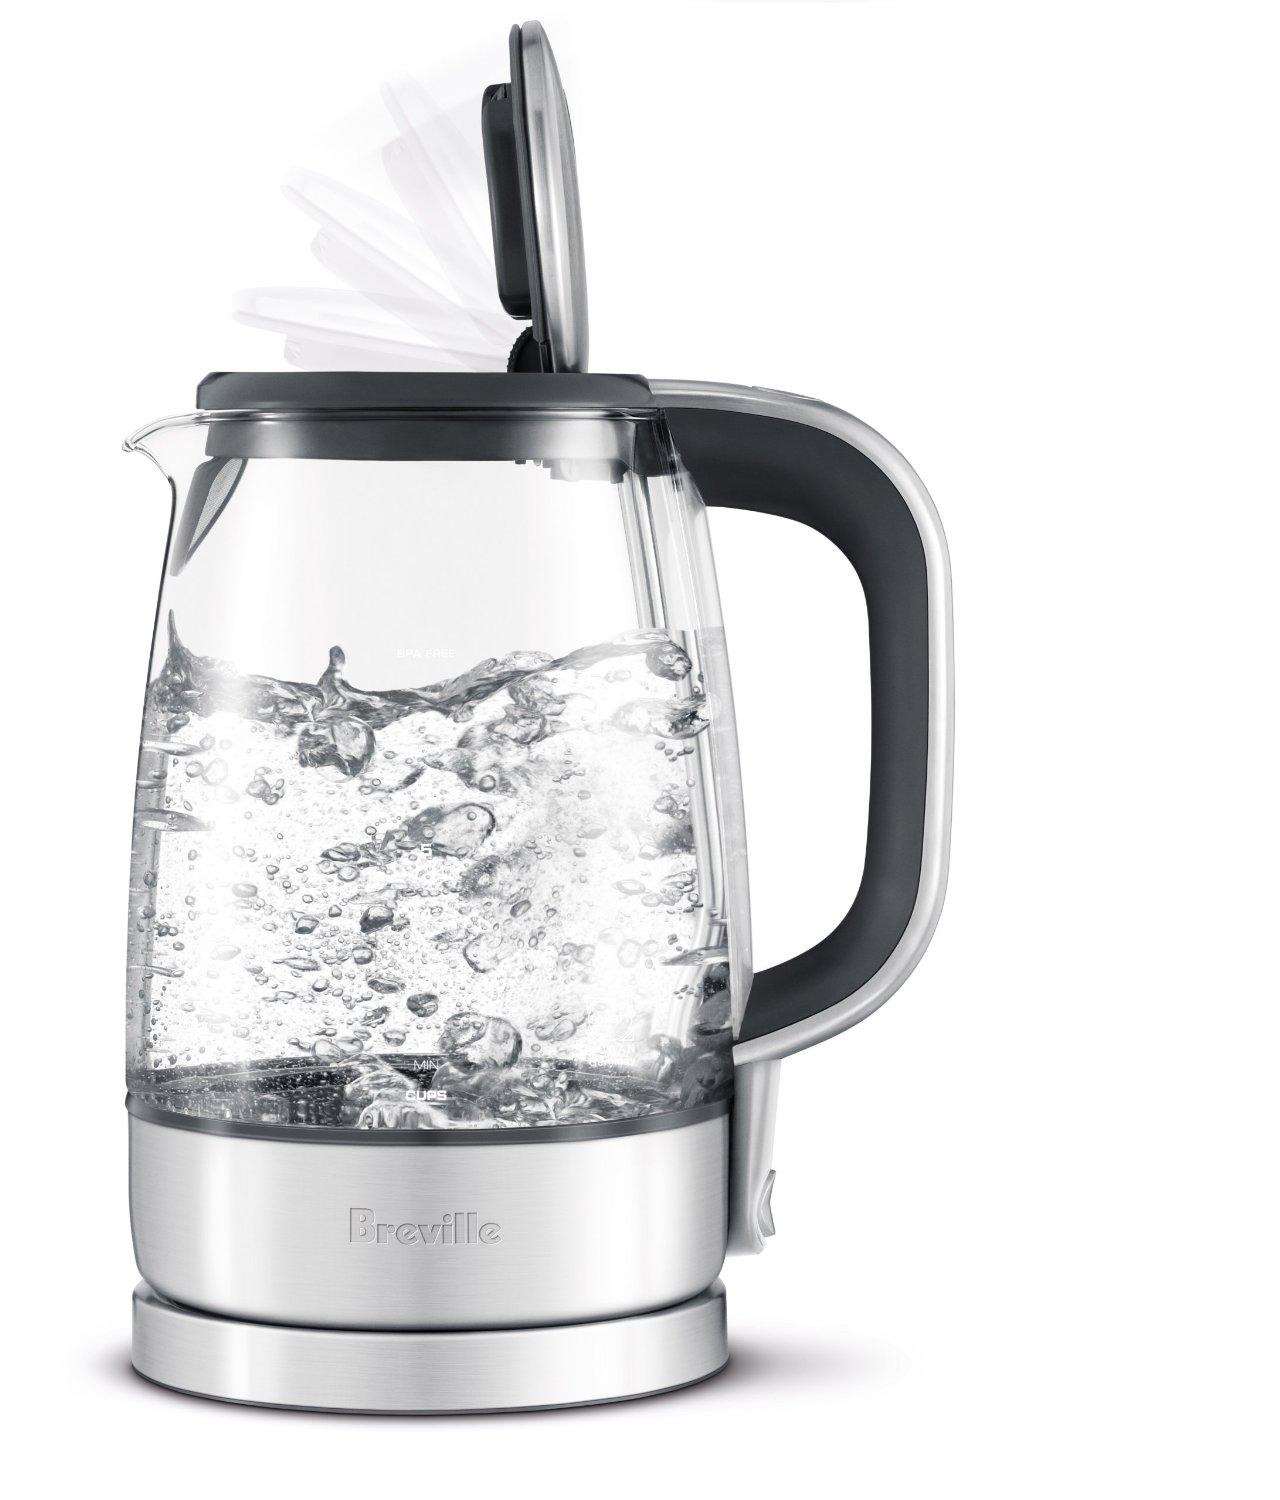 Breville glass kettle review